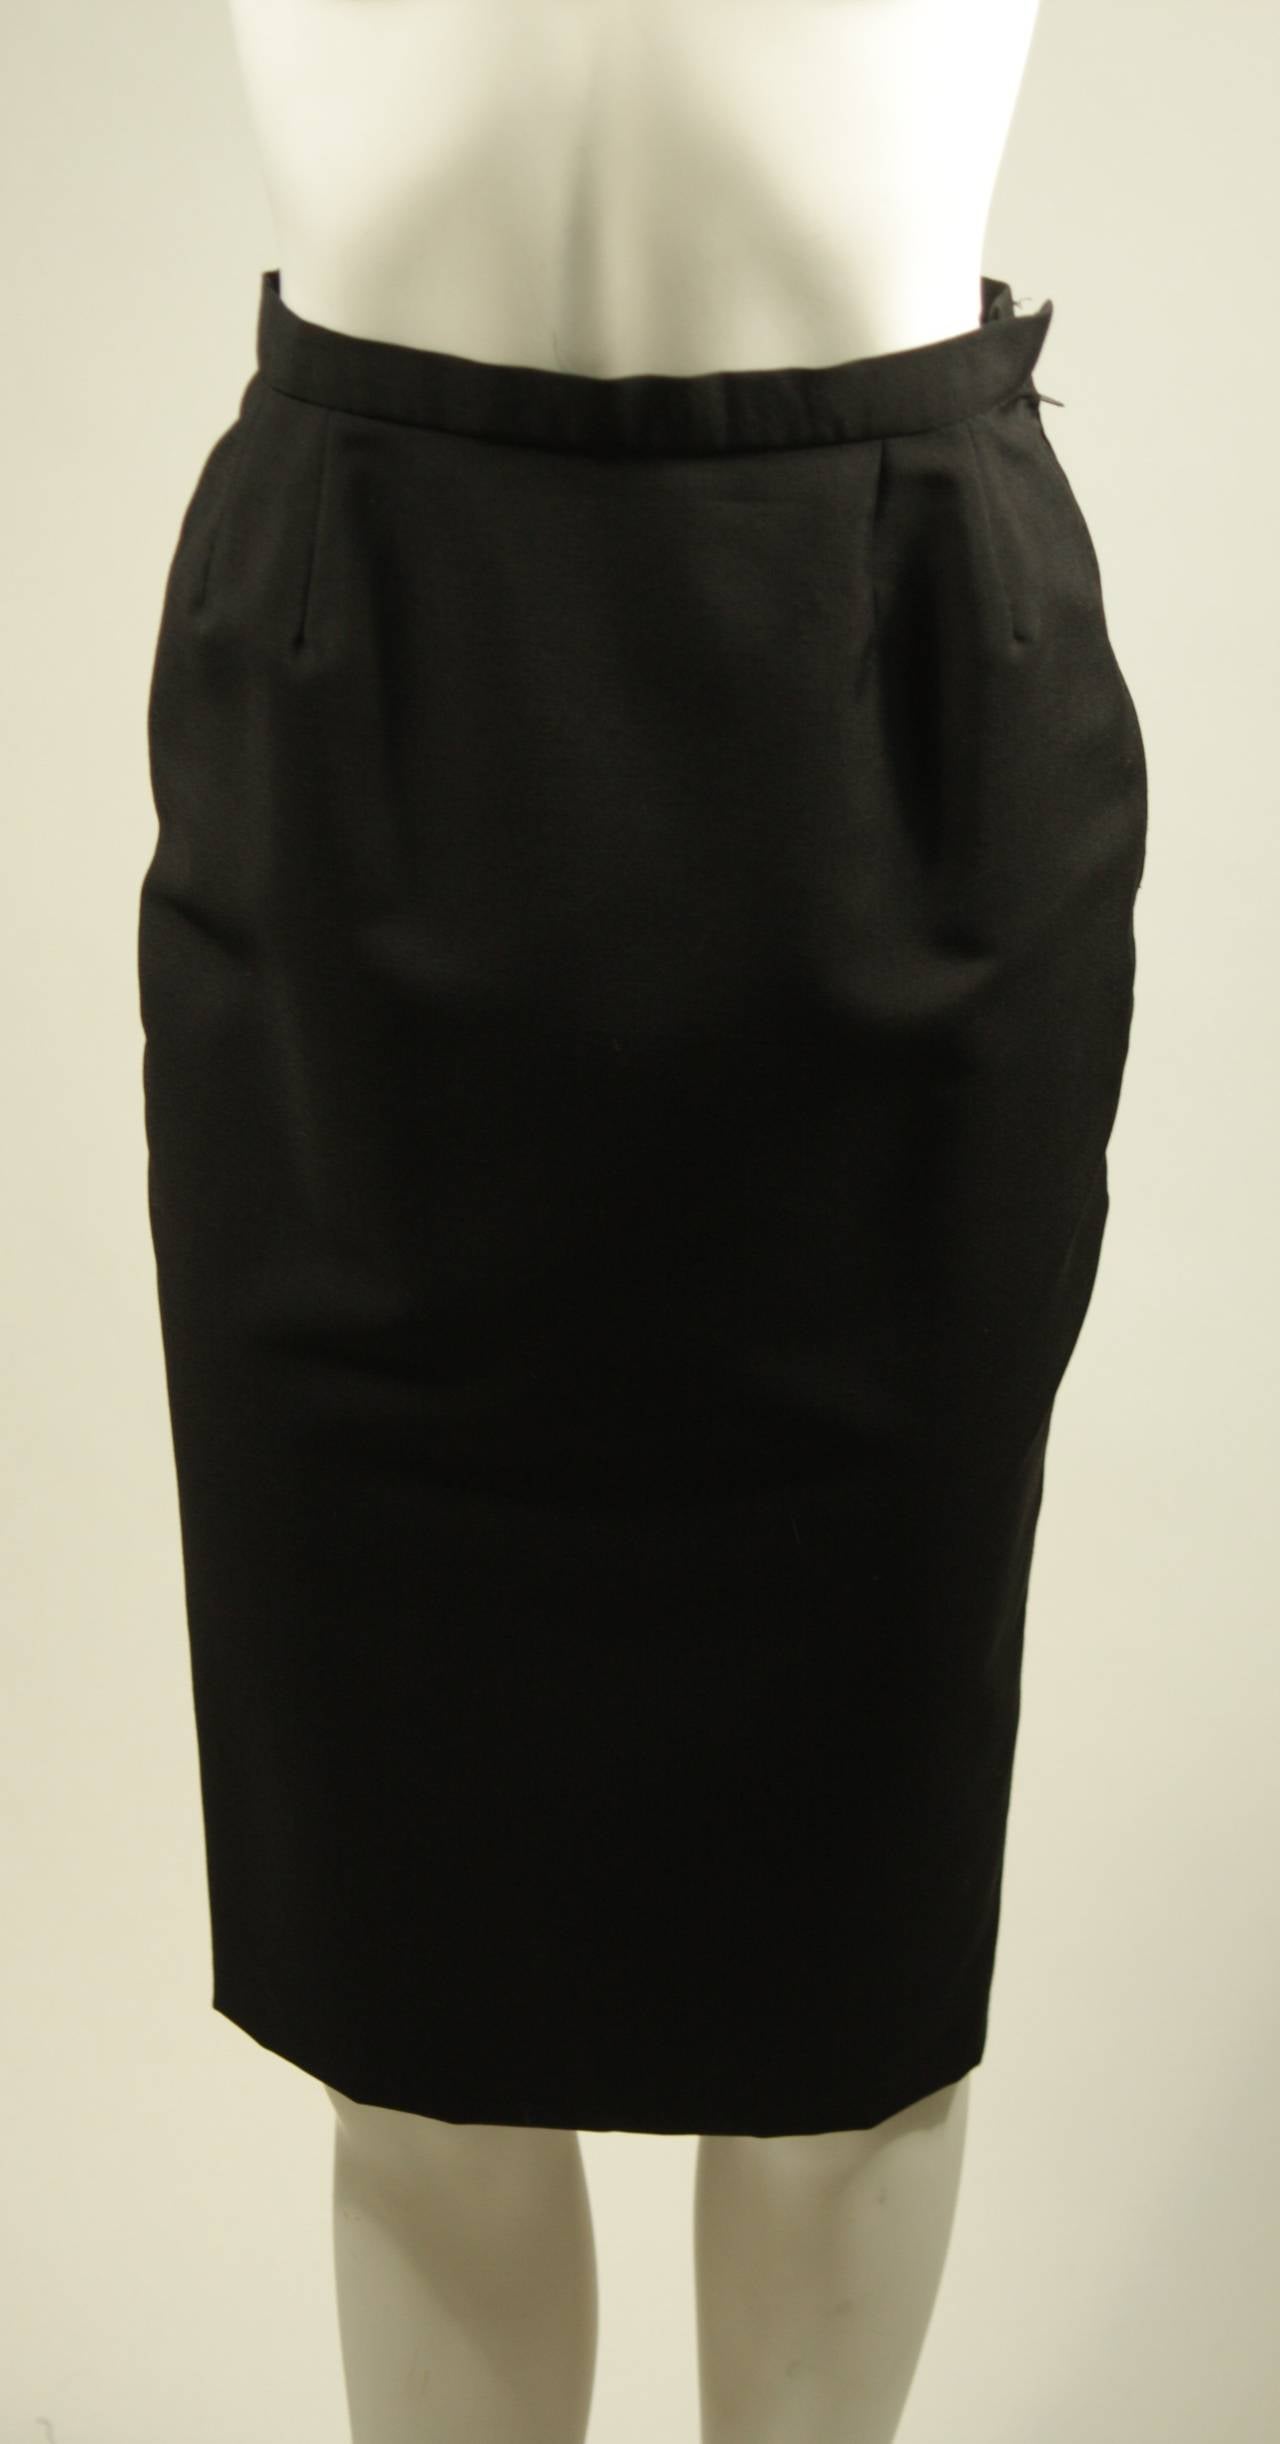 GALANOS HAUTE COUTURE Betsy Bloomingdale Black Skirt Suit with Cut-Out Details 5